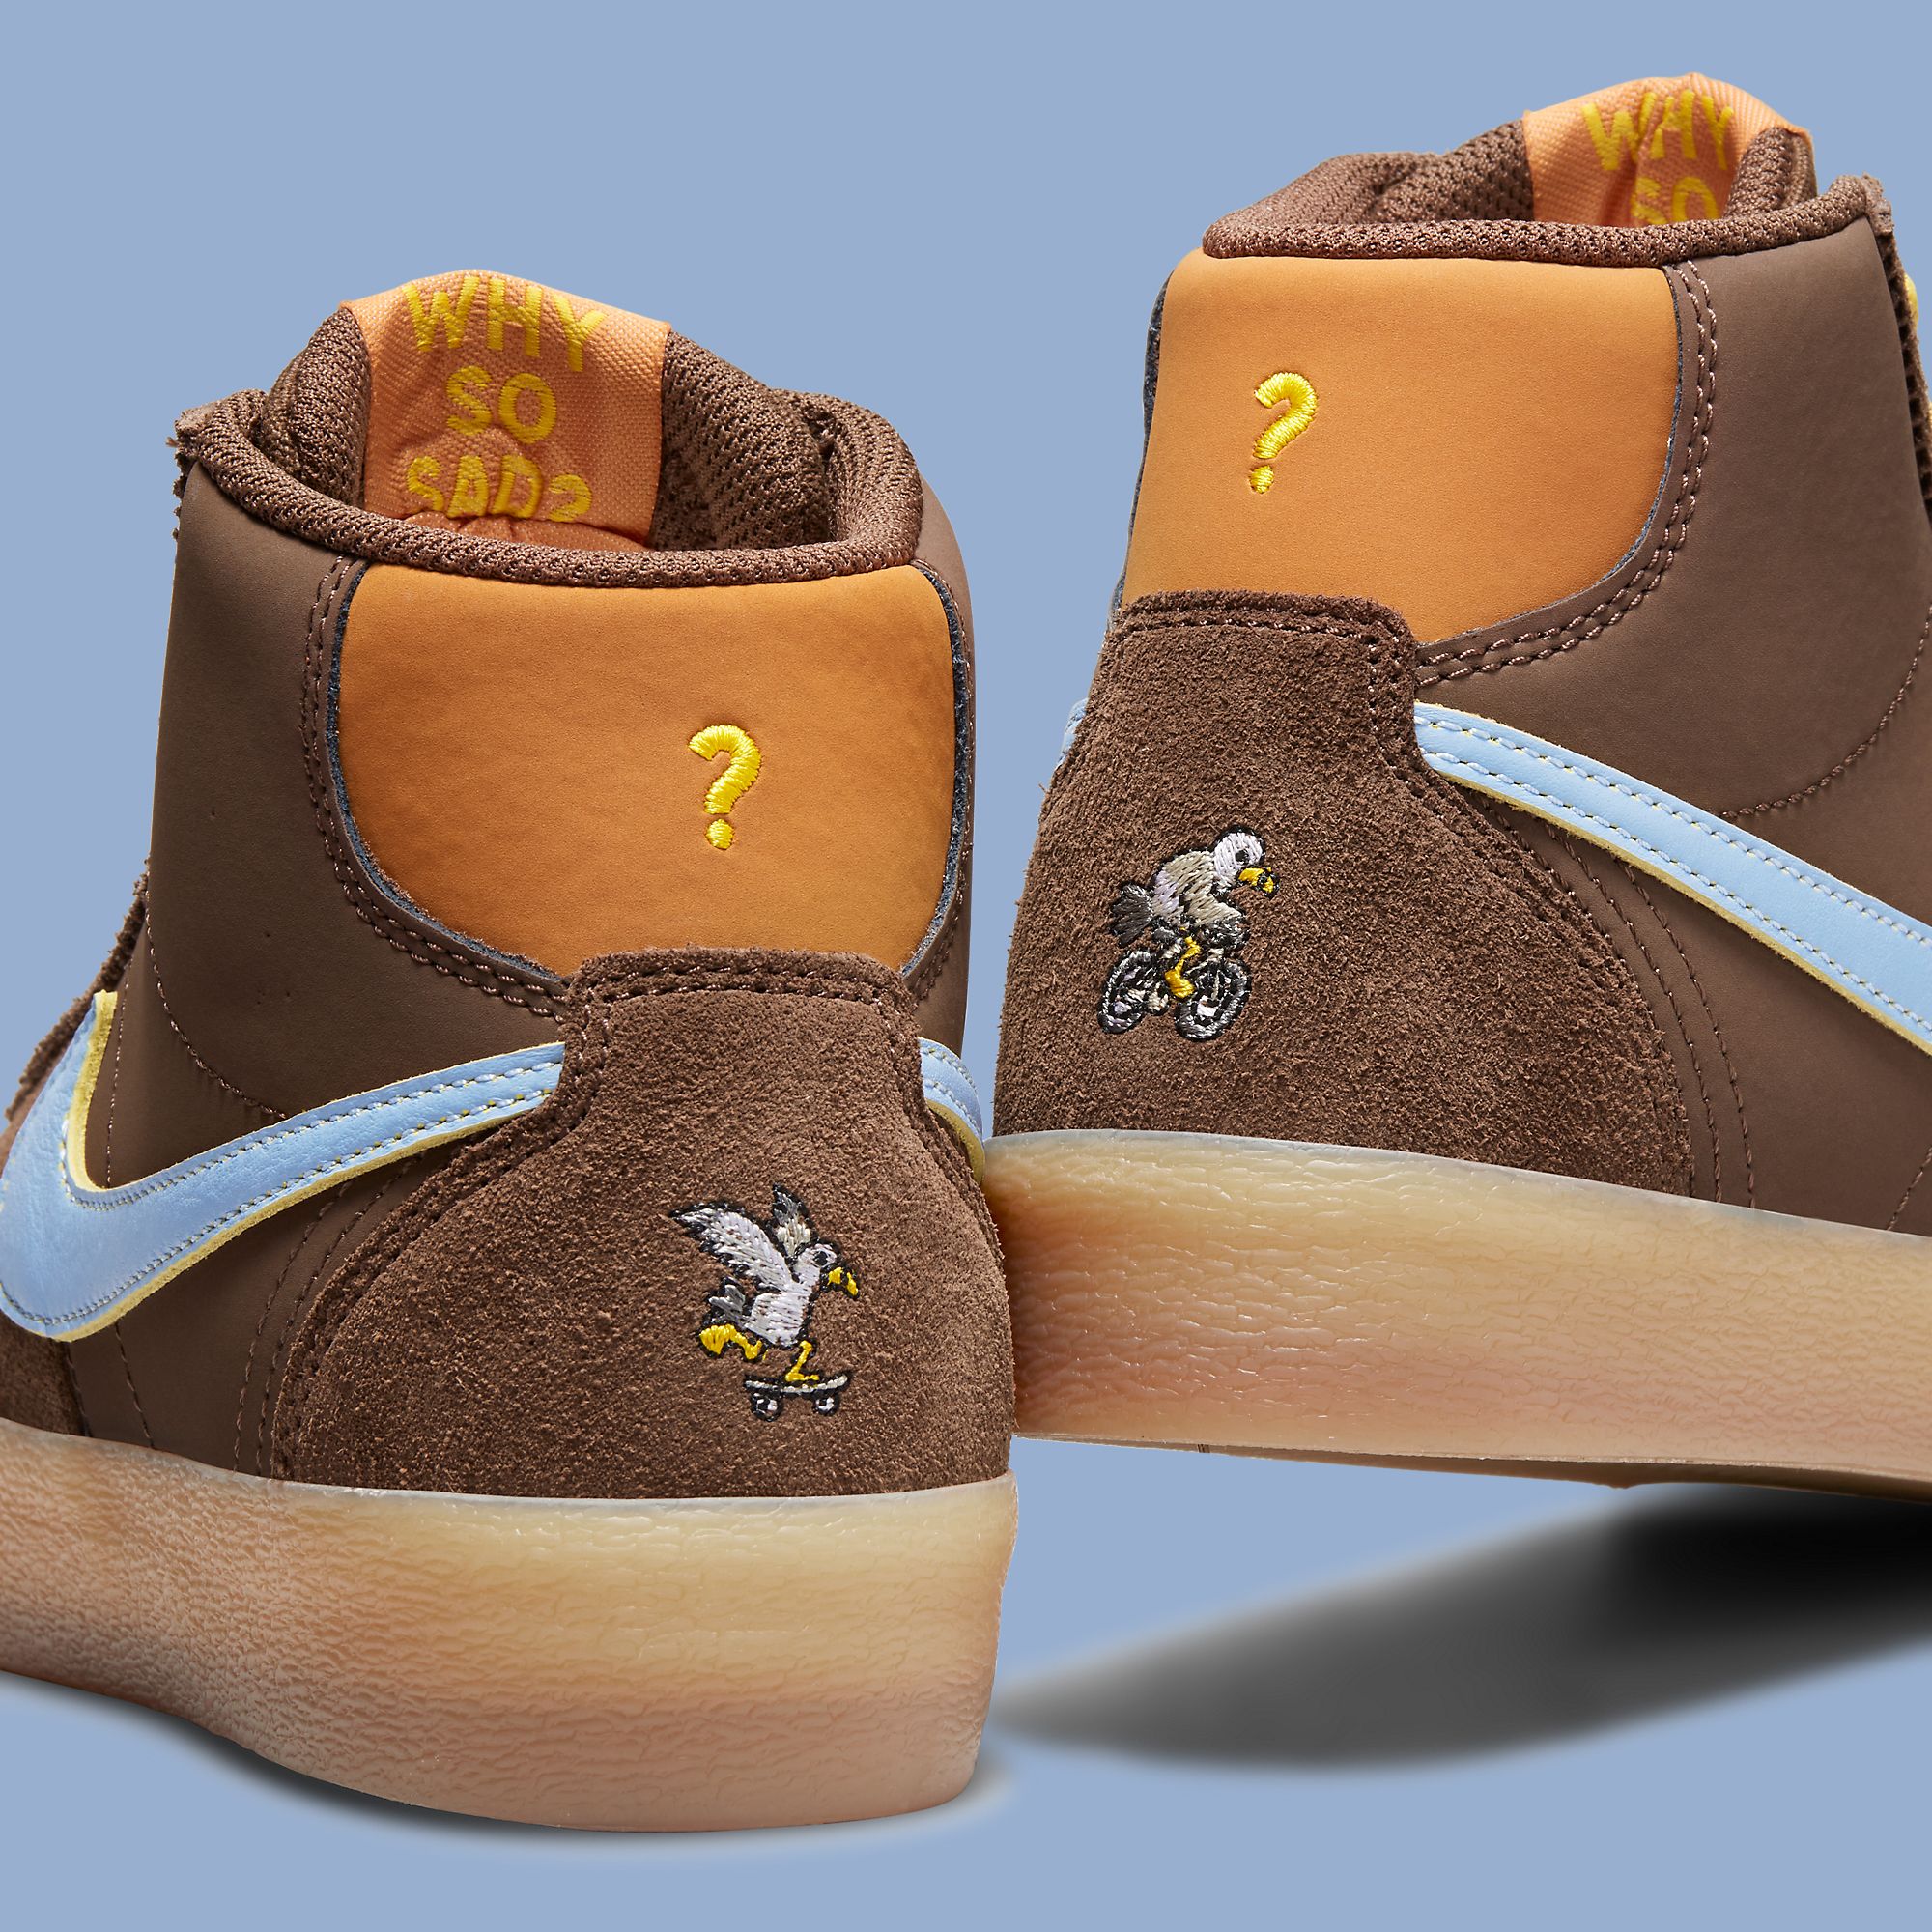 Official Images of the Why So Sad? x Nike SB Bruin Mid - Sneaker 